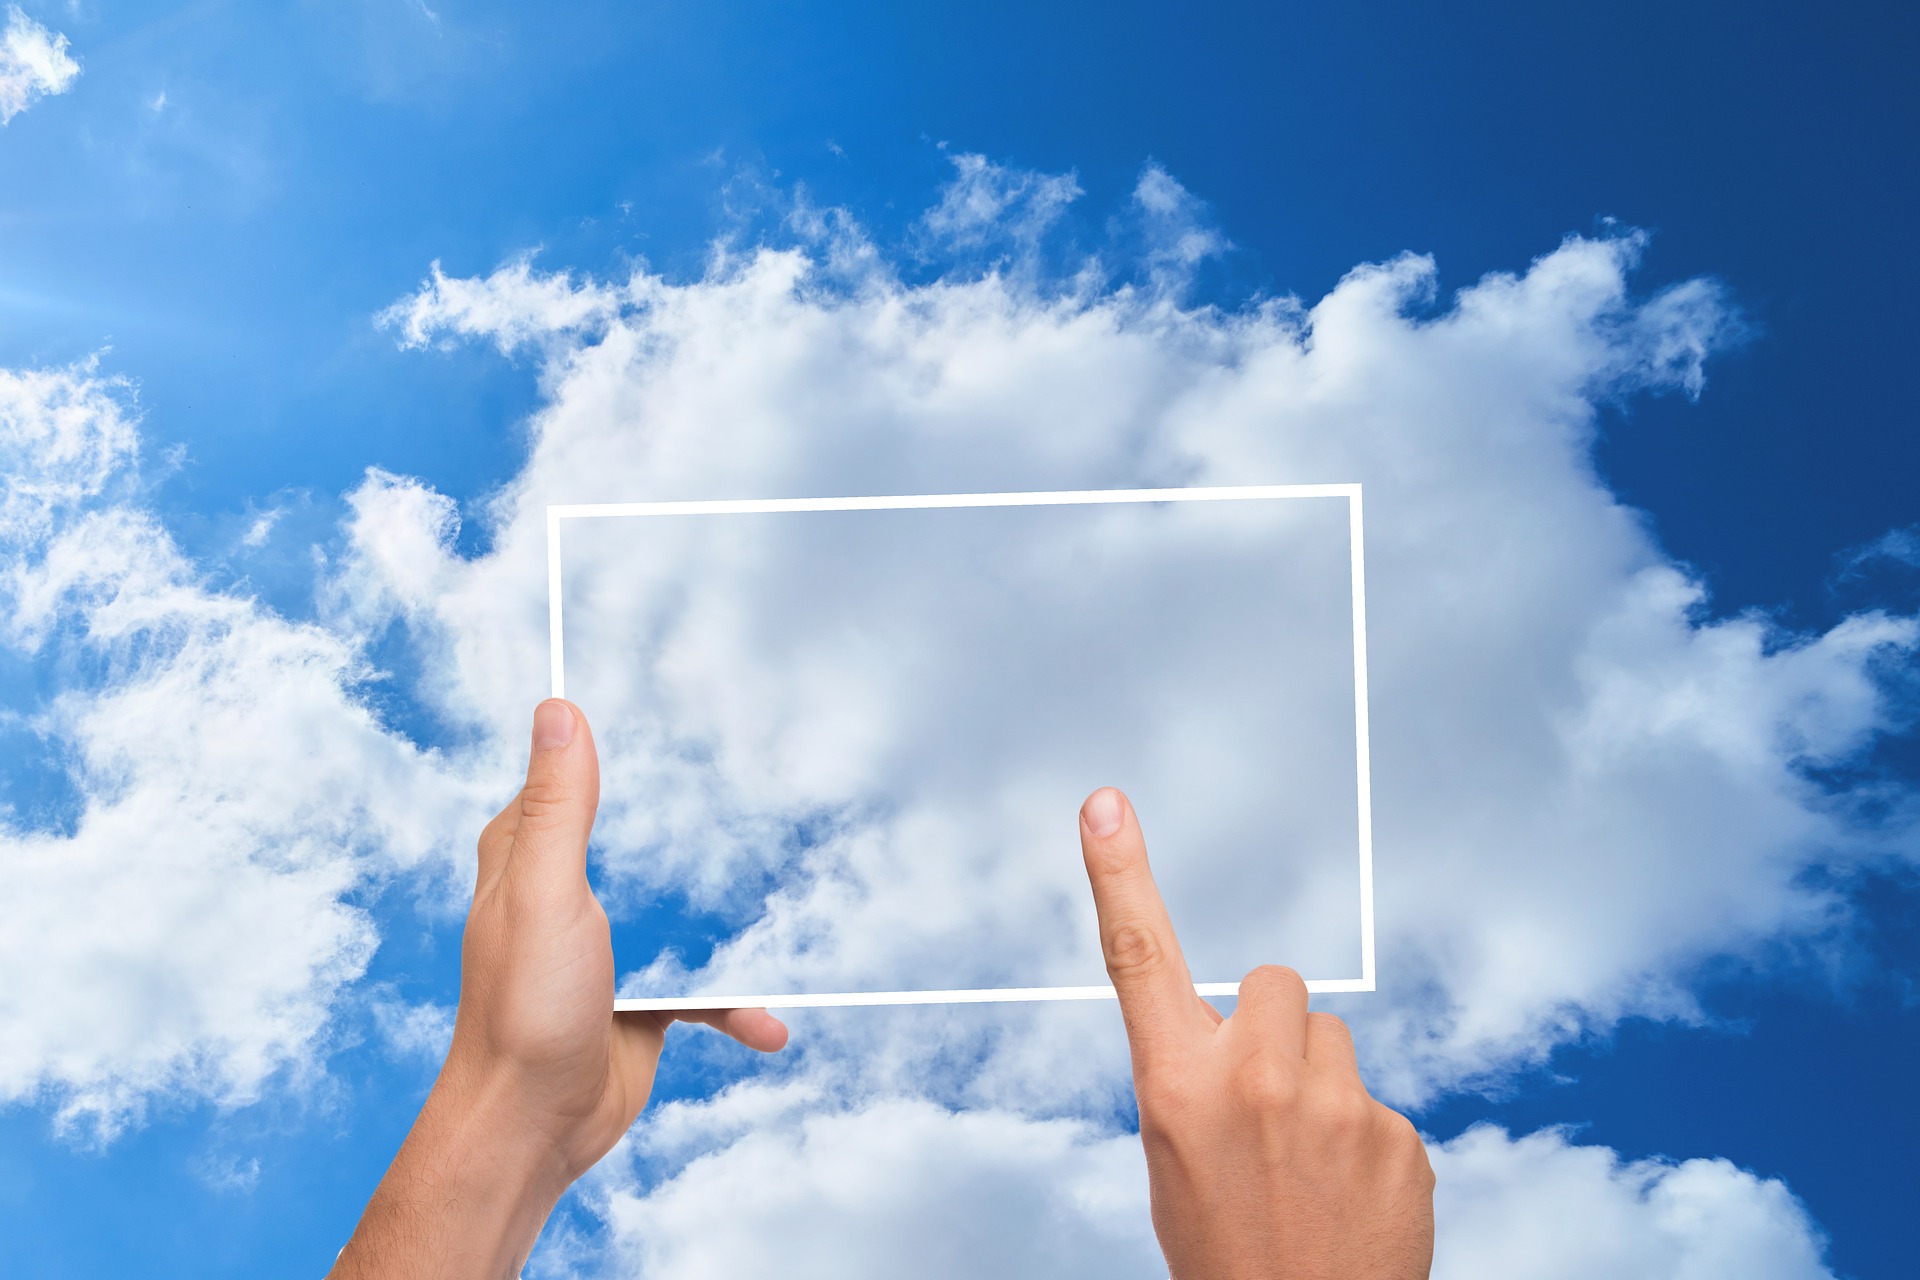 6 Cloud technology trends that will impact your business in 2019